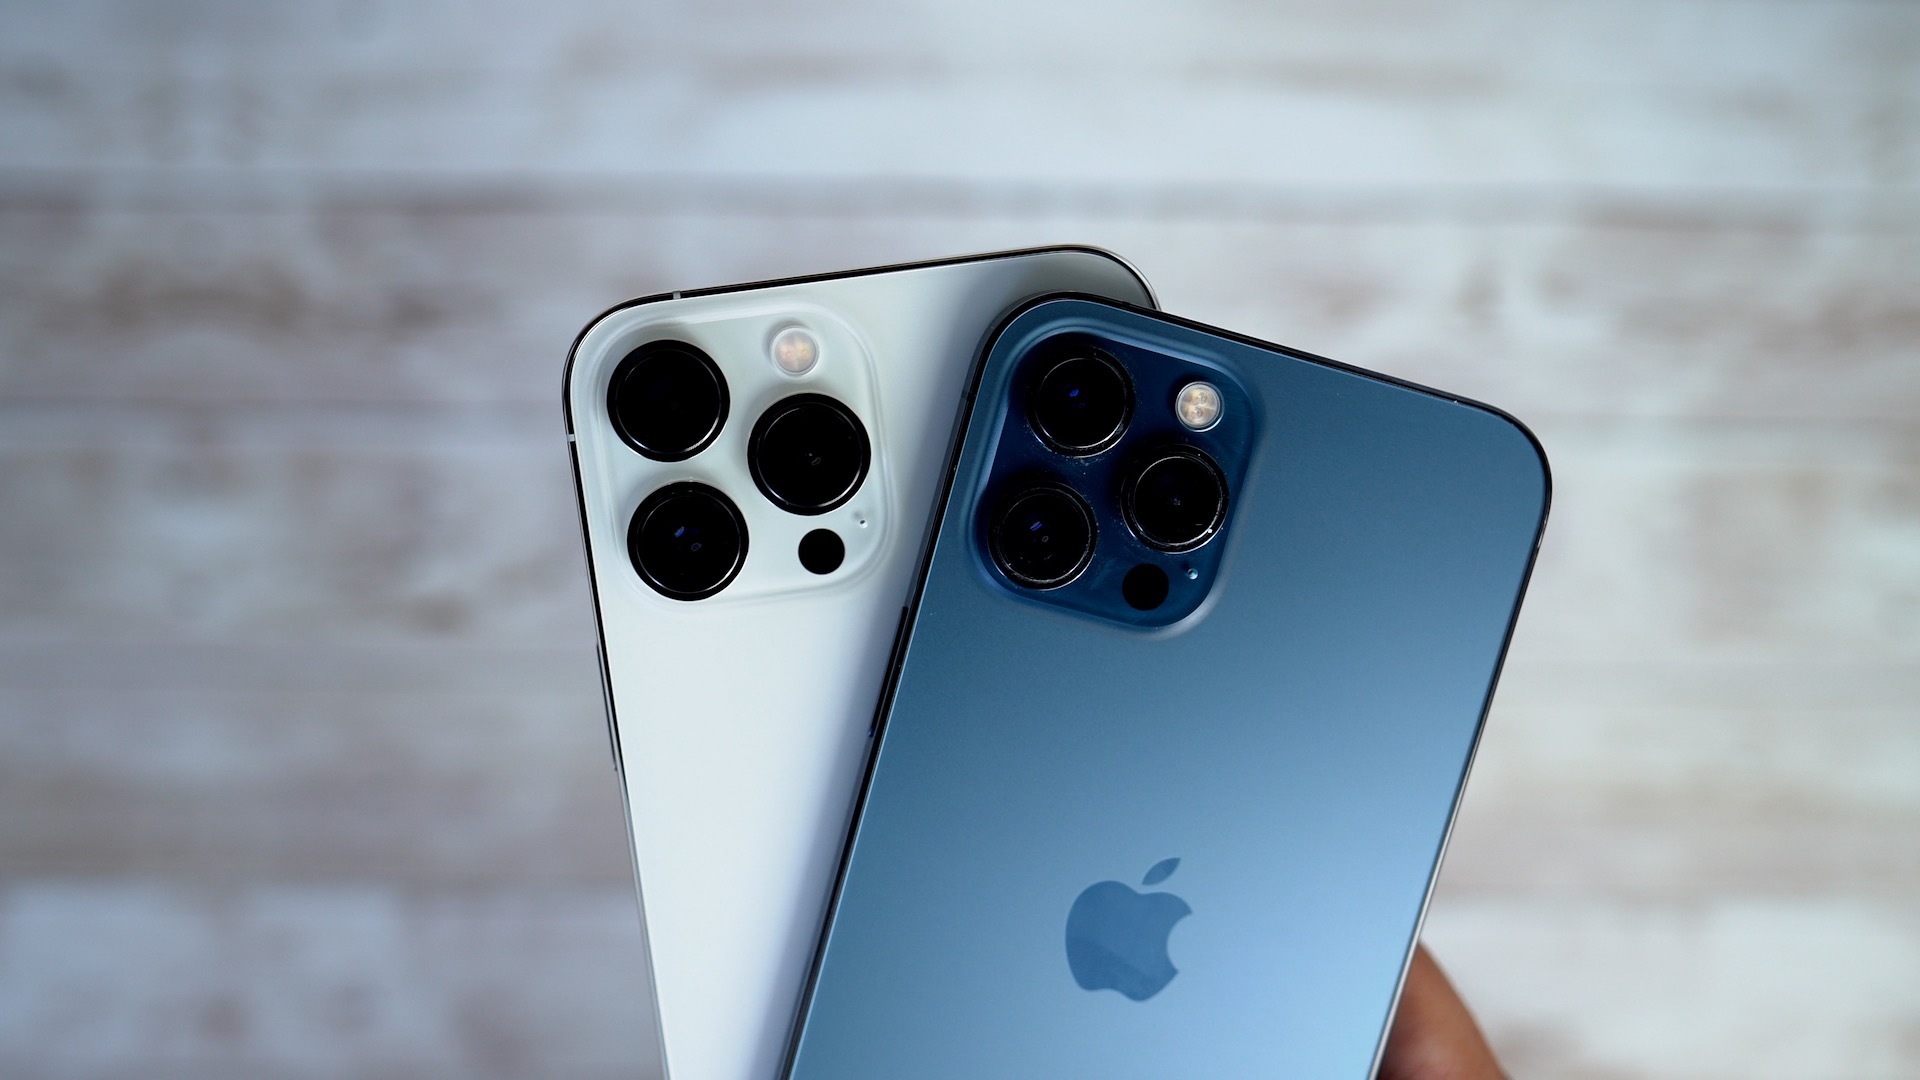 iPhone 13 Pro Costs Around $20 More to Build Compared to the iPhone 12